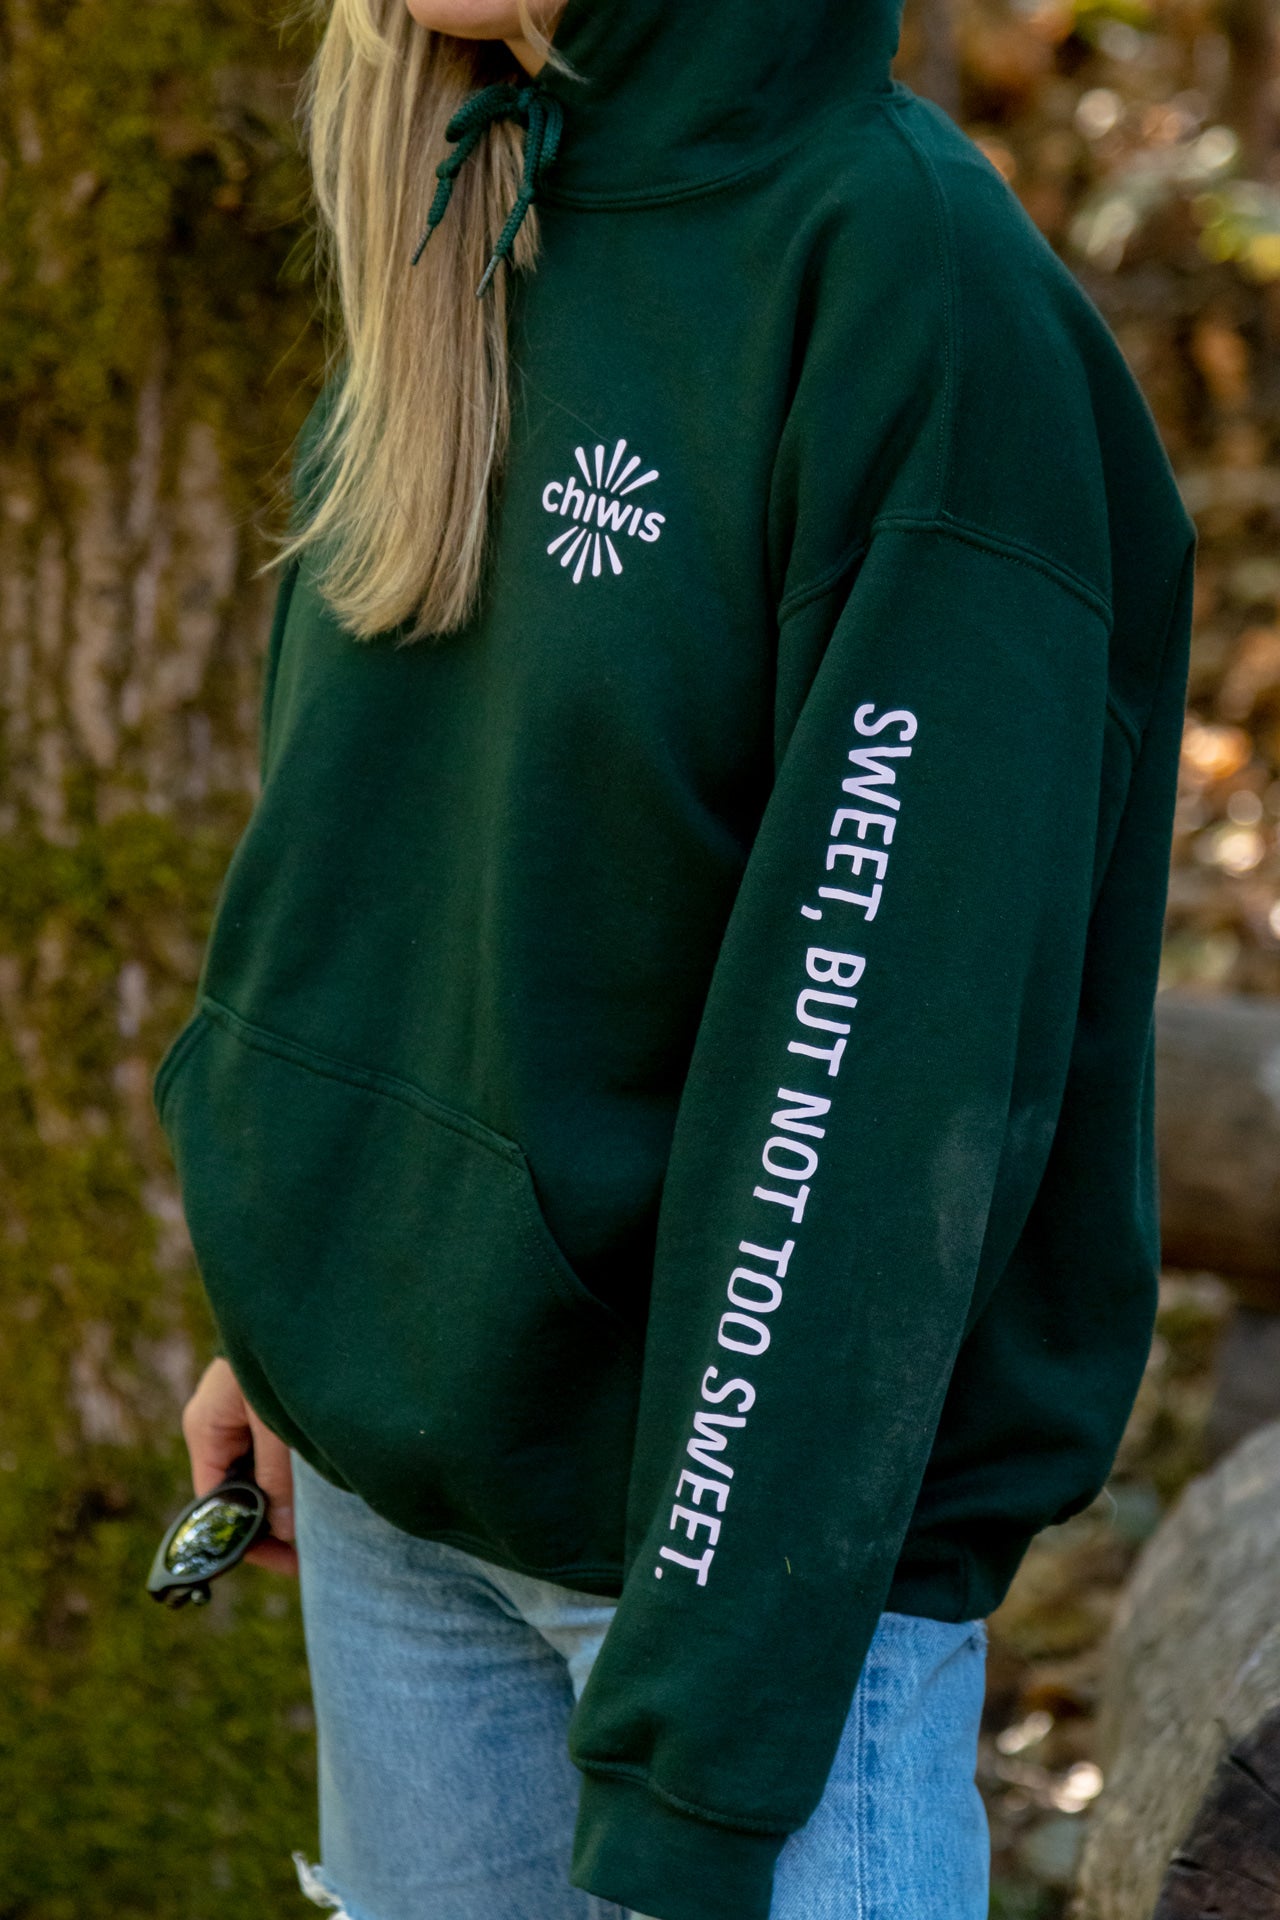 Adult Chiwis Hoodie